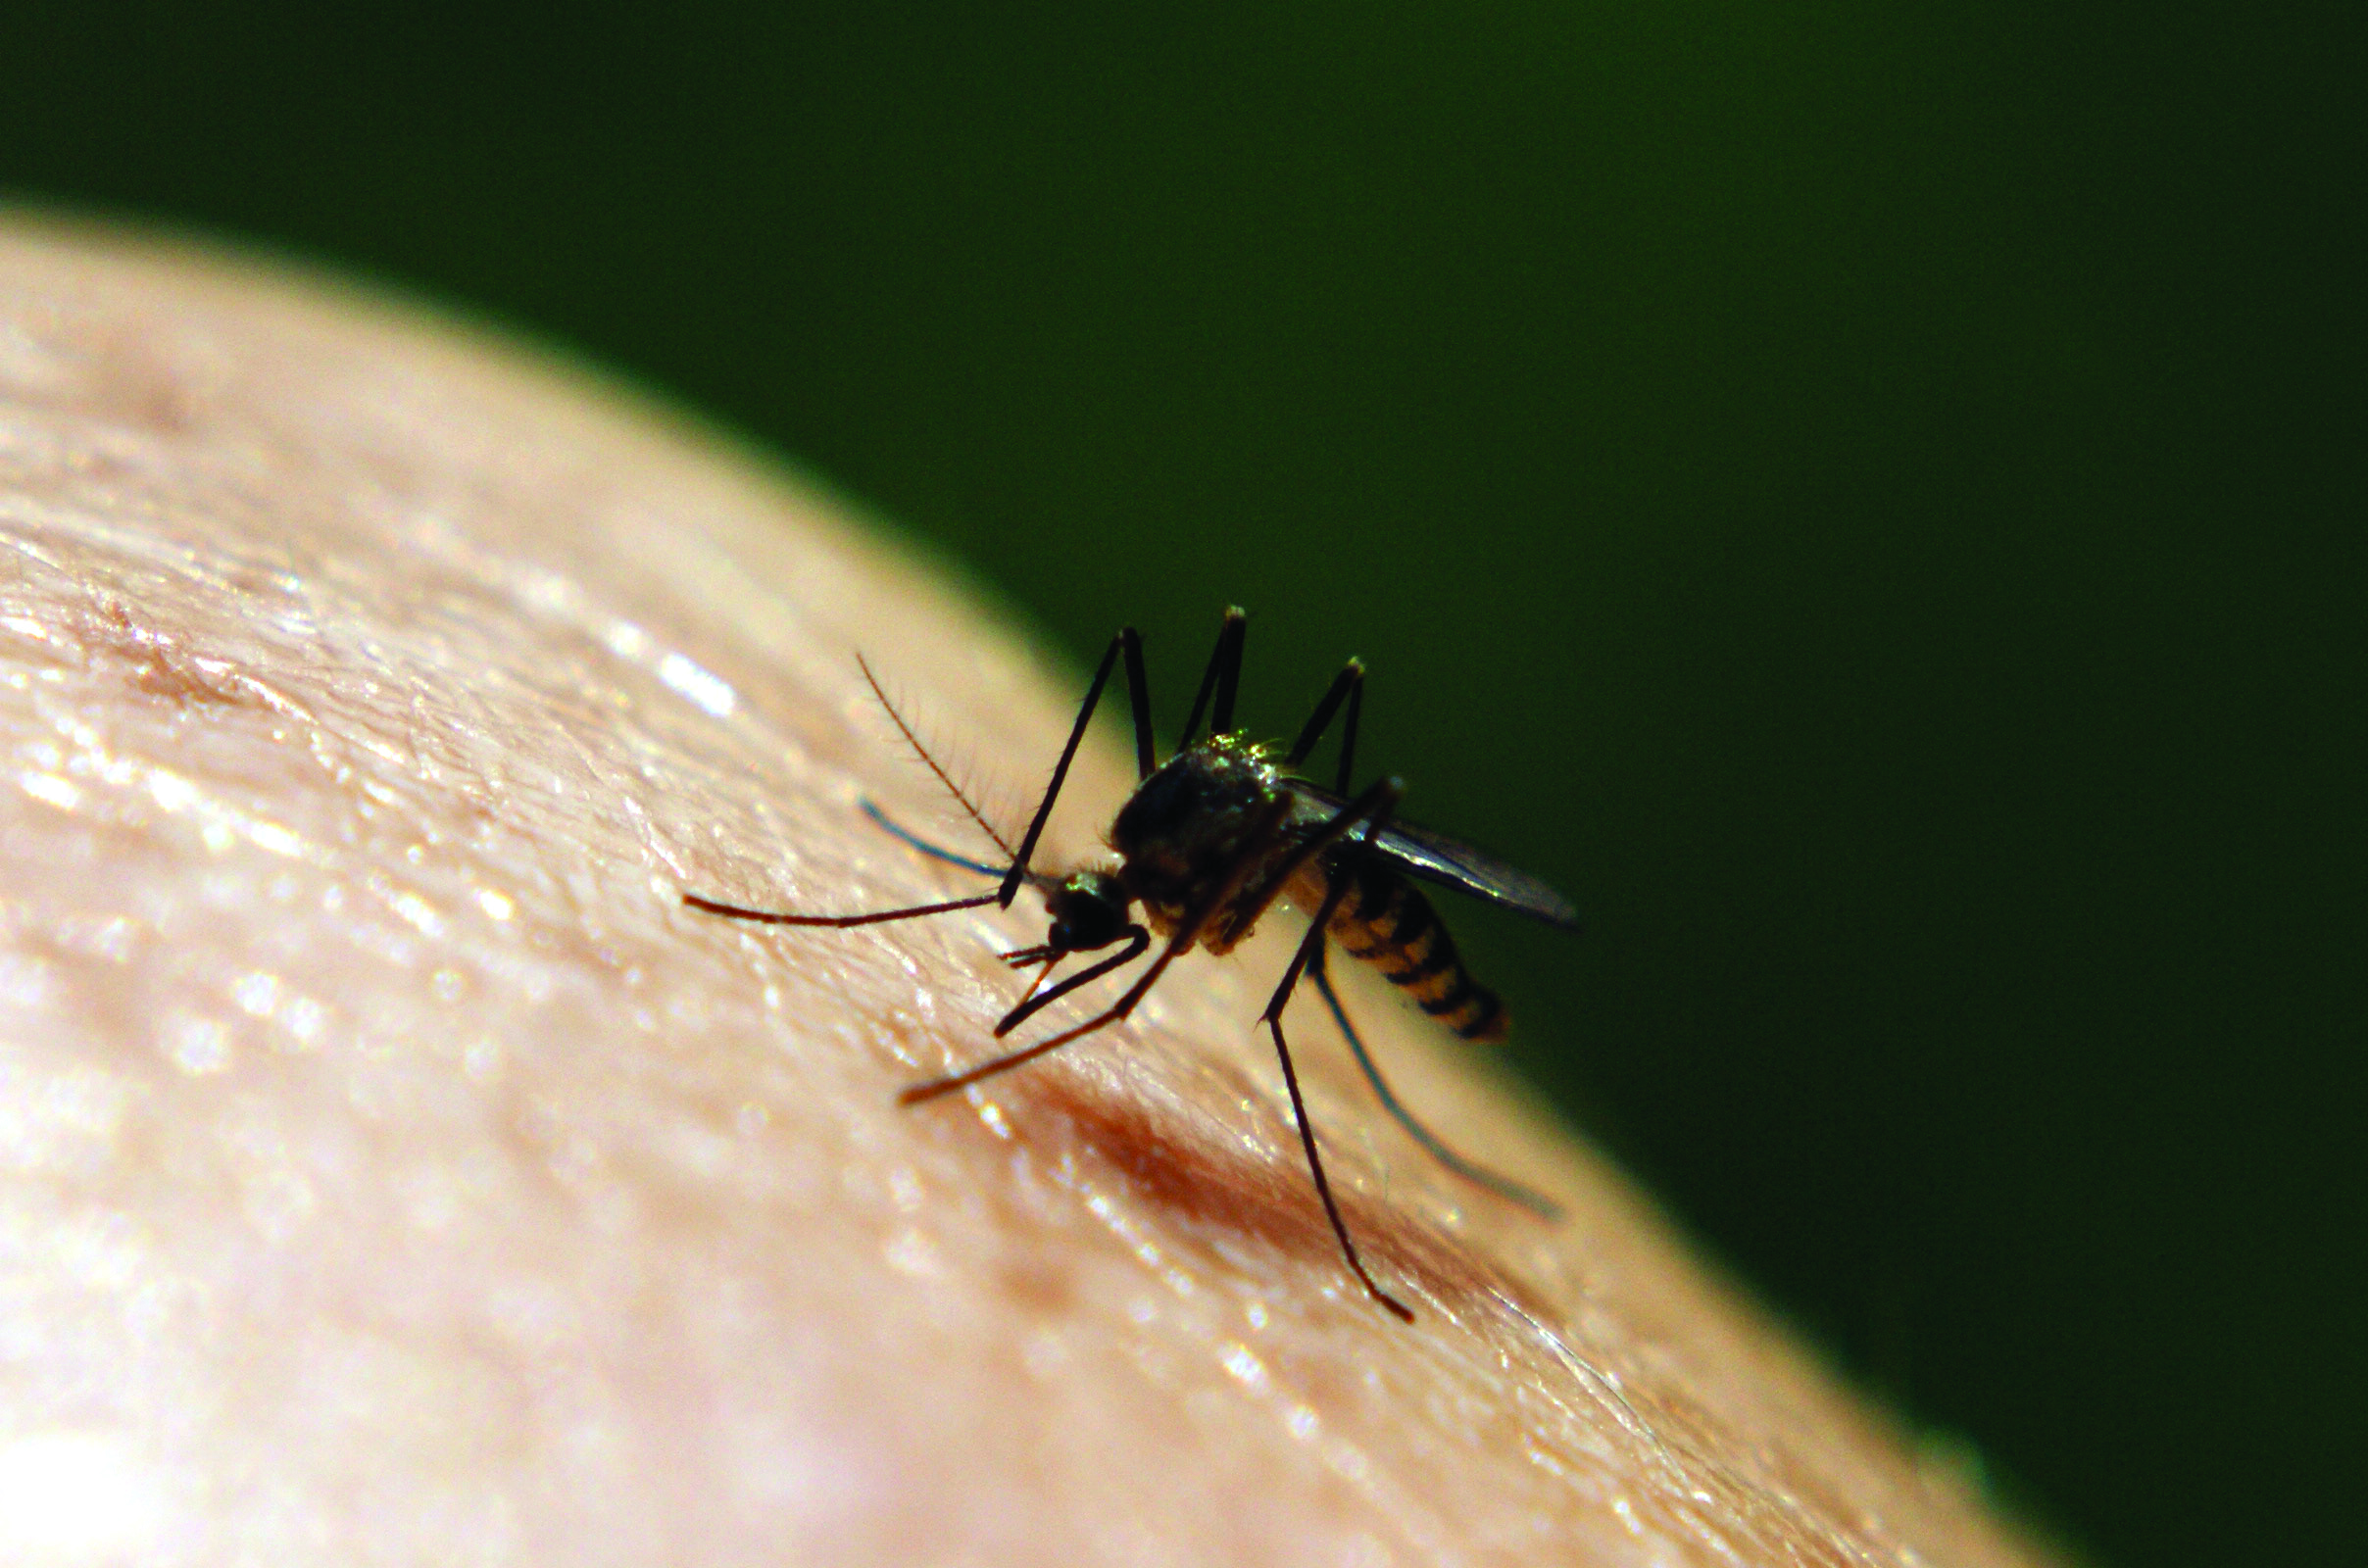 Close up of mosquito on skin.